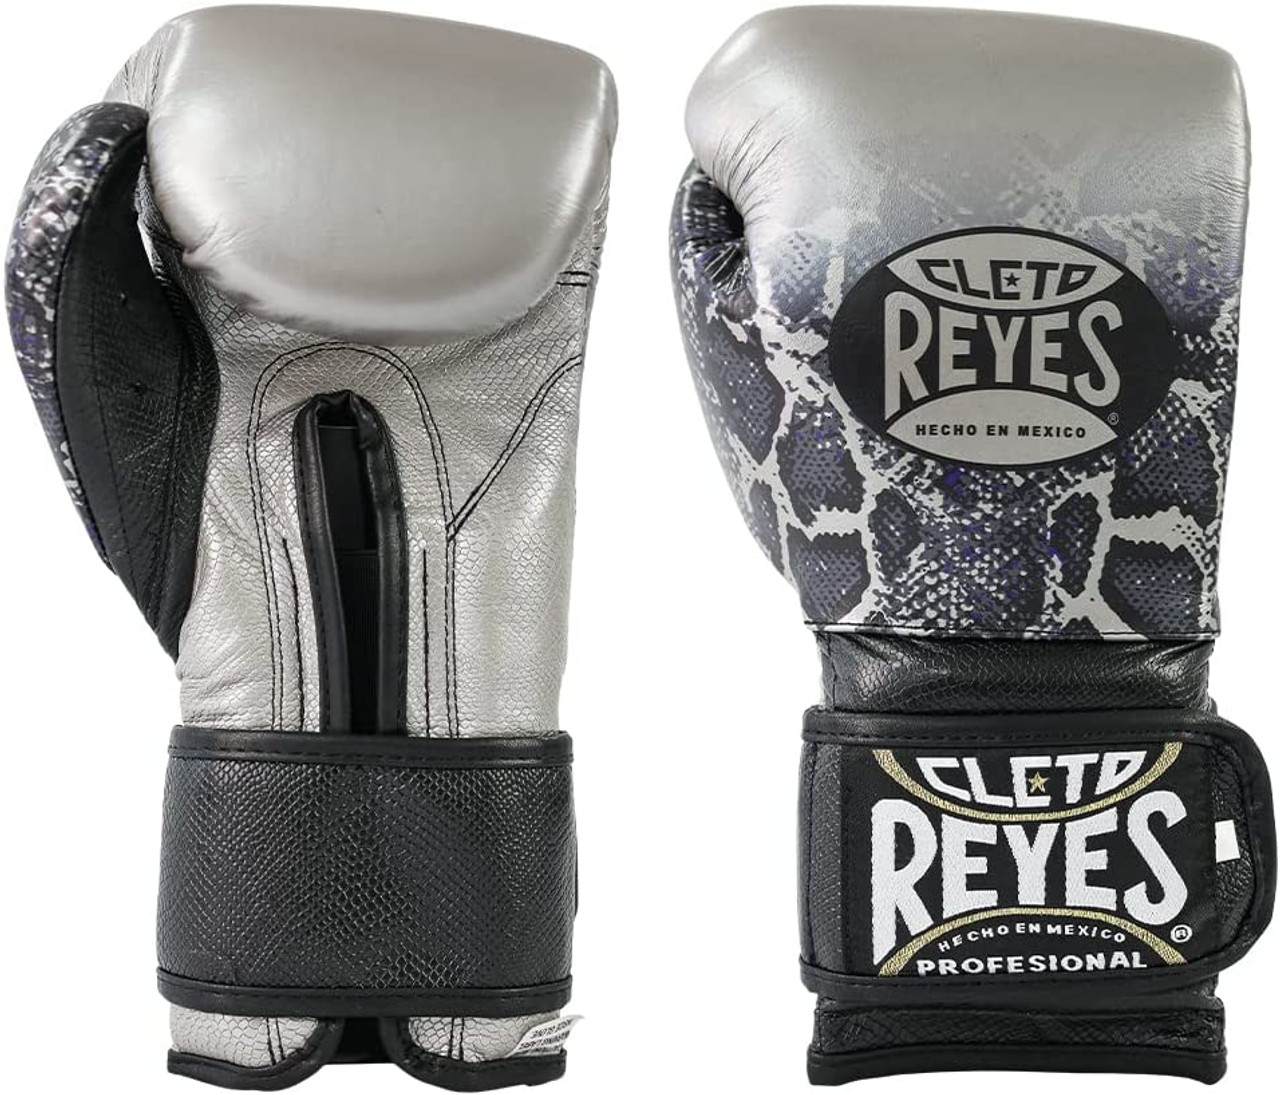 Cleto Reyes Training Boxing Gloves with Hook and Loop Closure